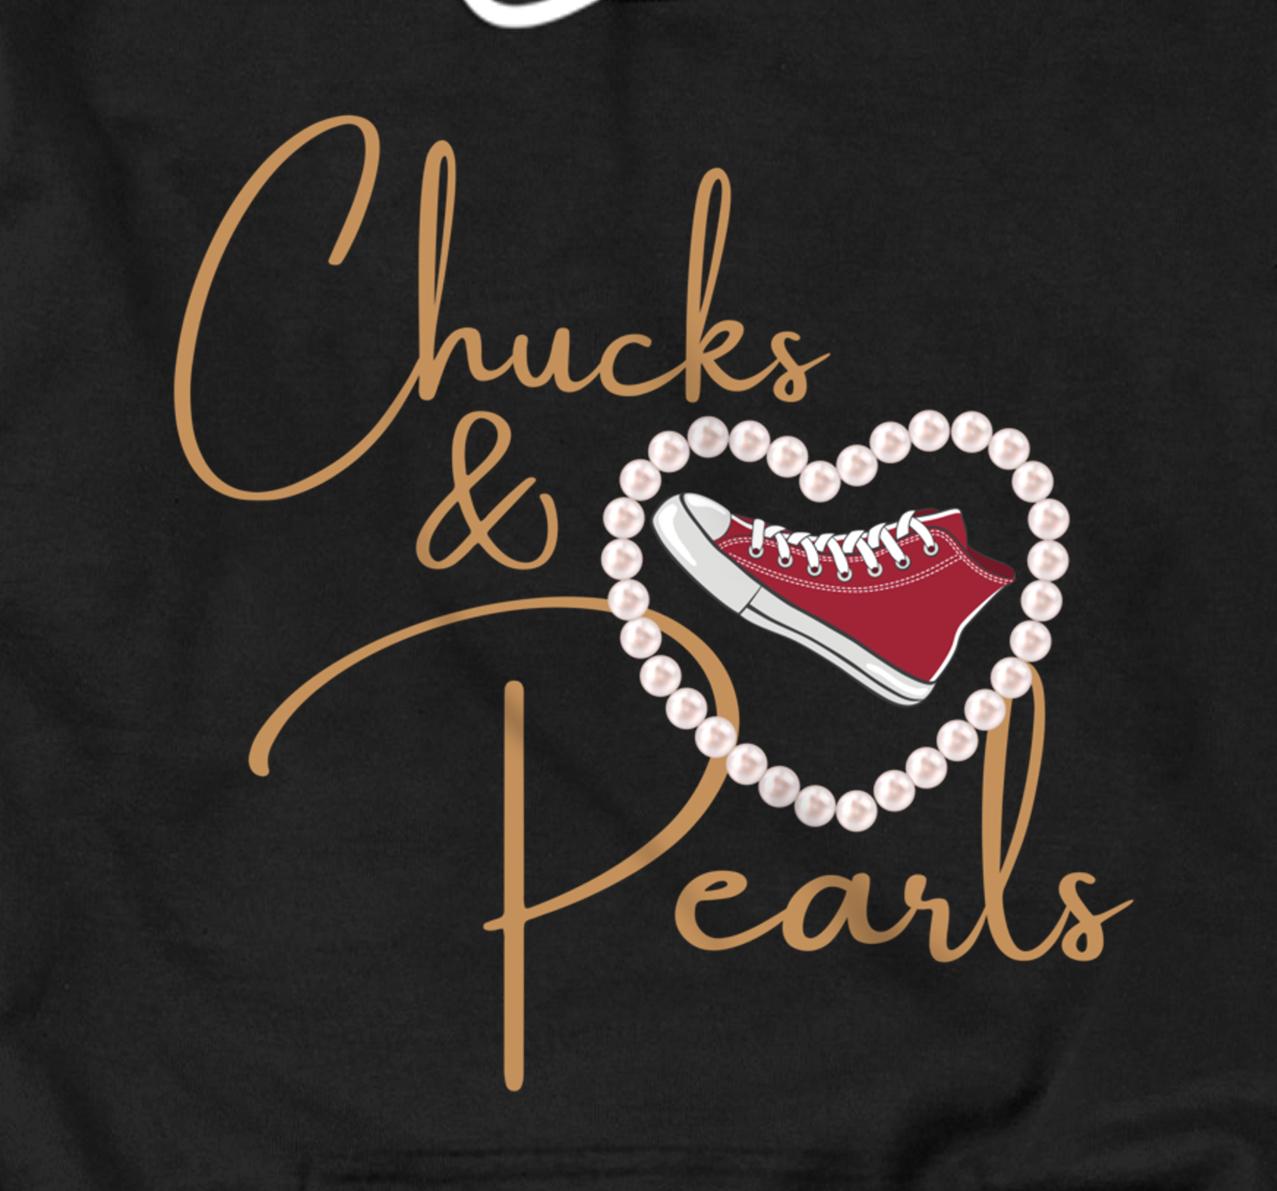 Chucks and Pearls 2021 Valentine Heart HBCU Red Gift T-Shirt